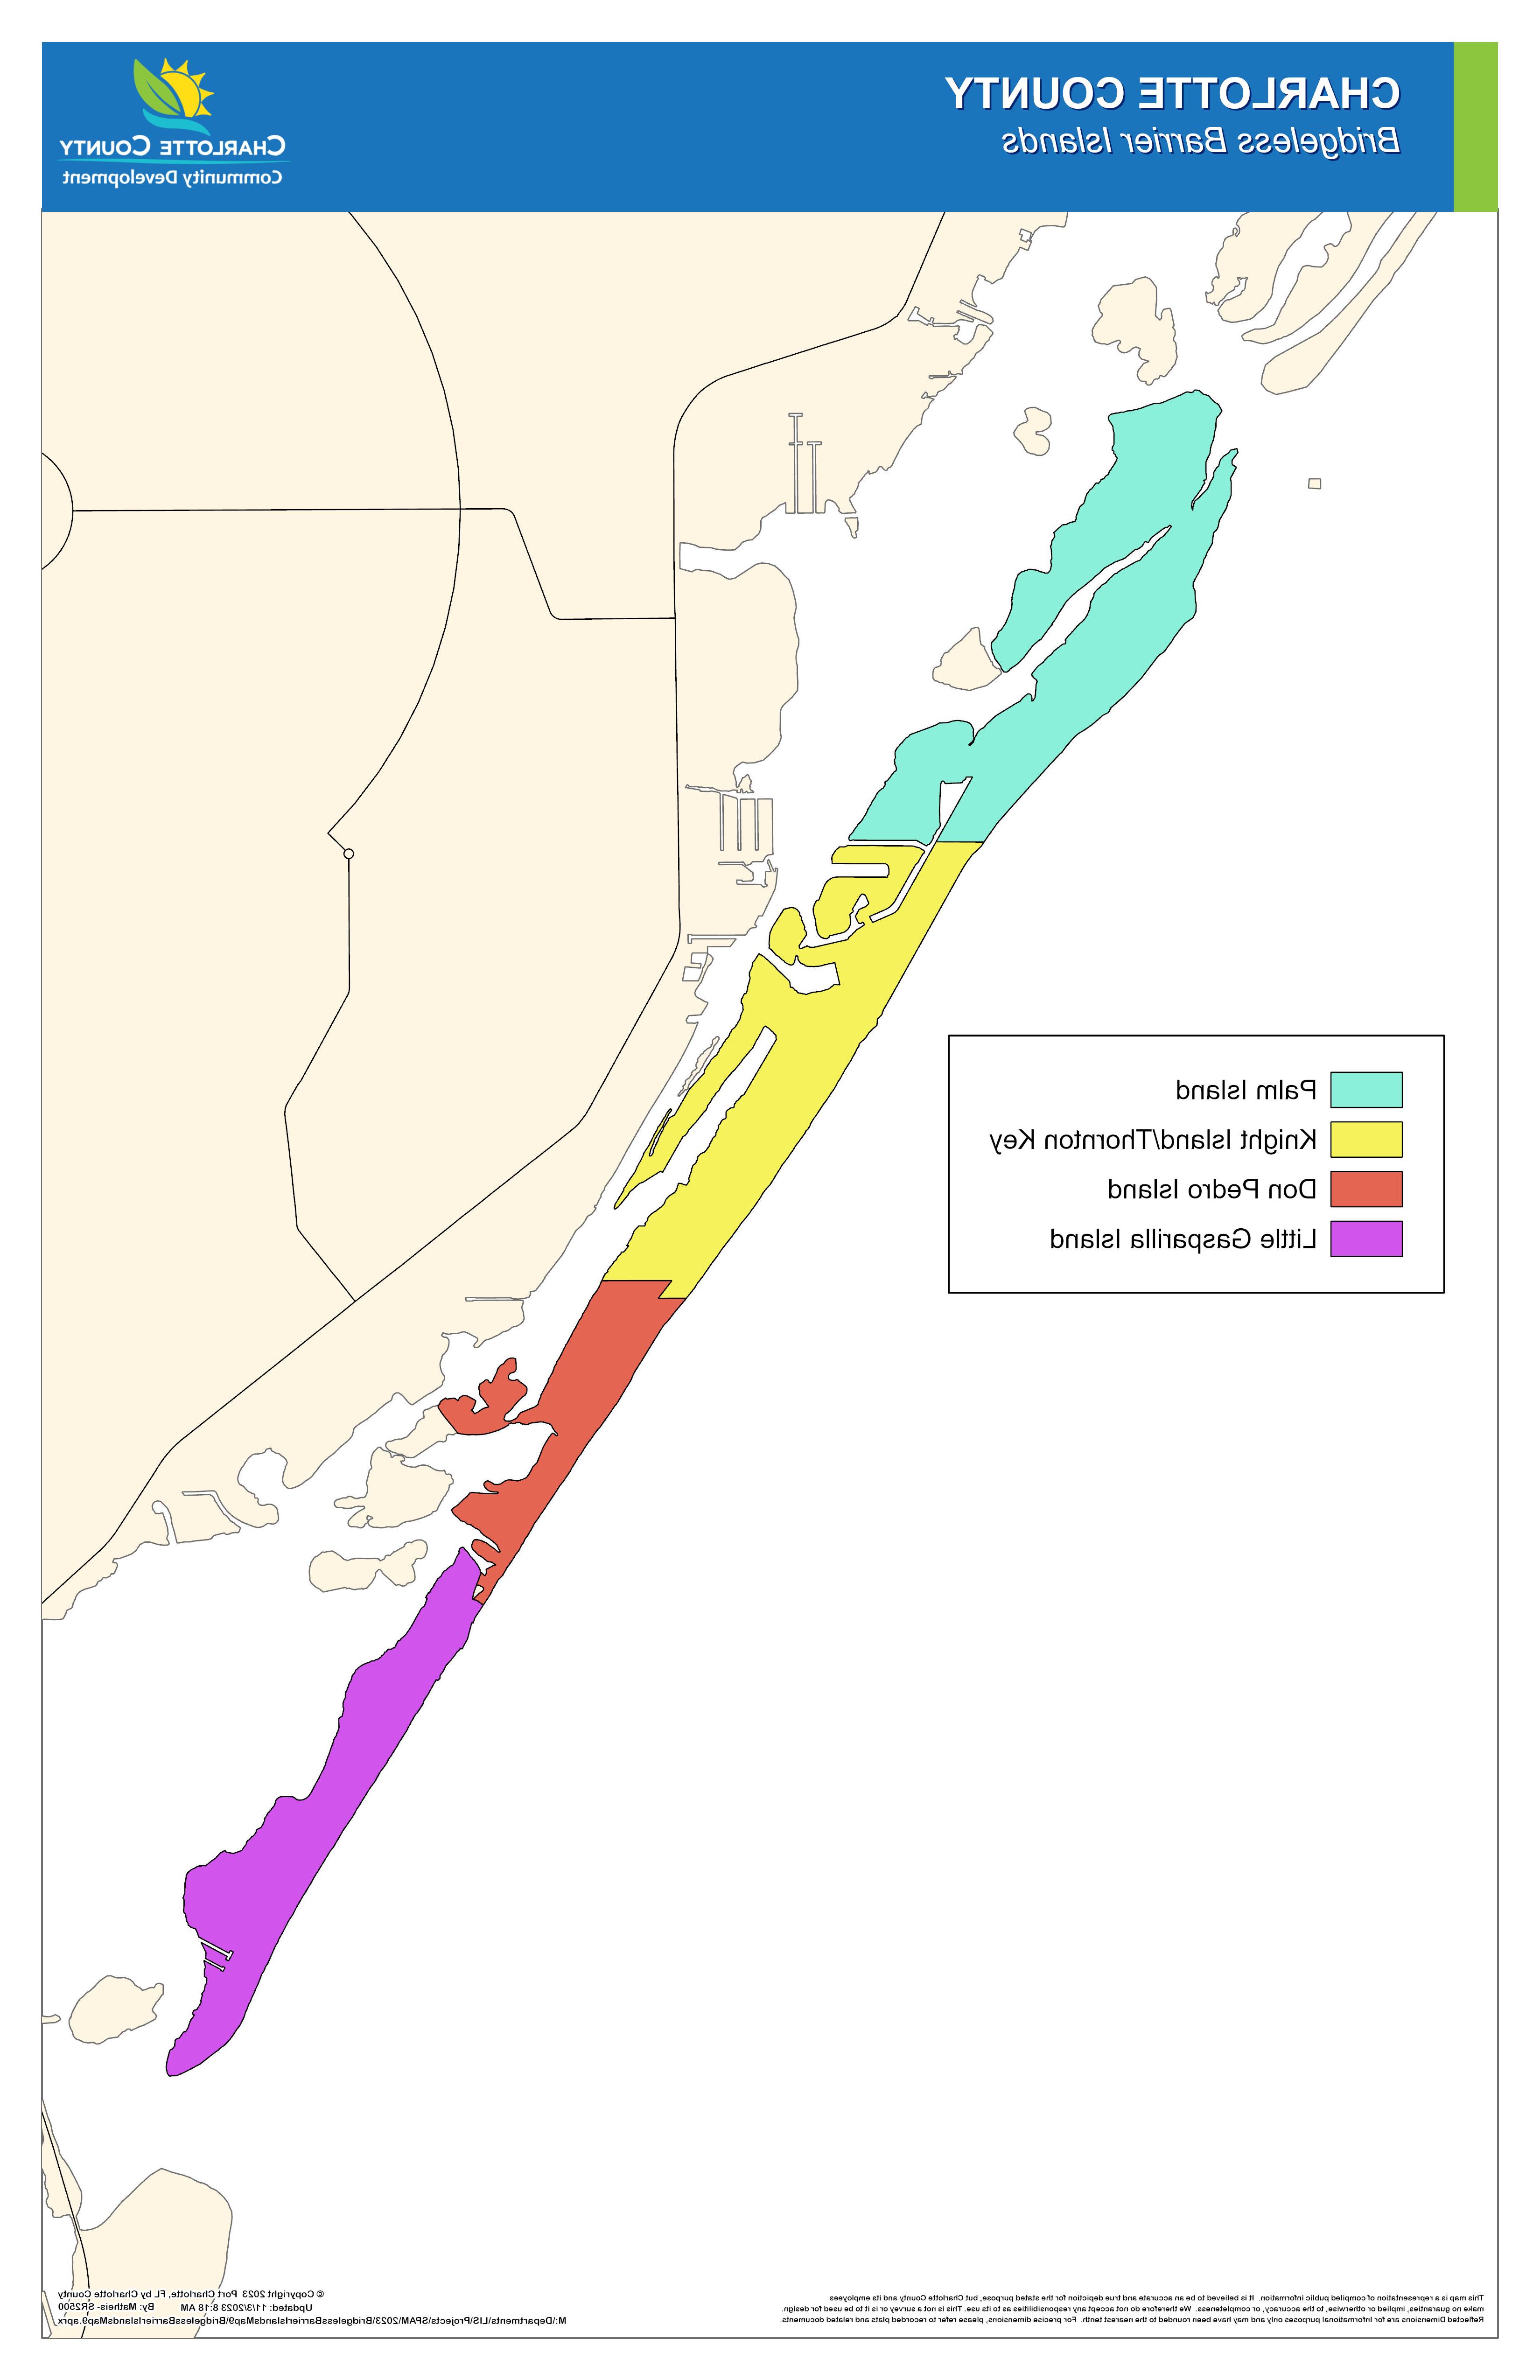 Bridgeless Barrier Islands Accessibility Study Project Image